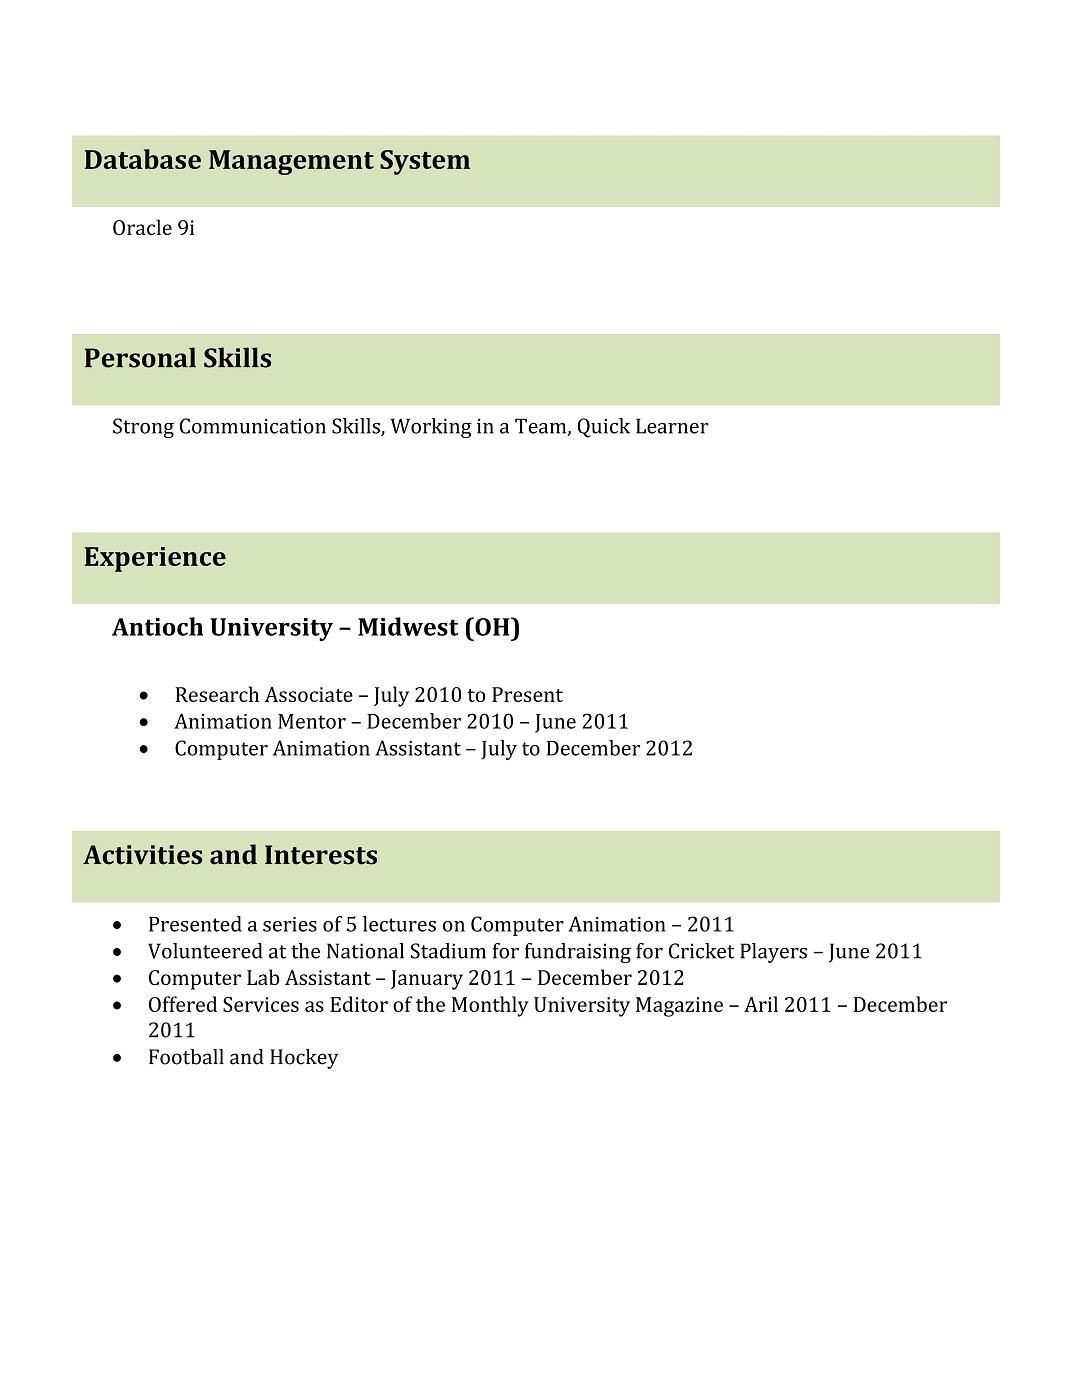 Sample Resume for Freshers Looking for the First Job Pdf Download Resume Templates Free for Freshers Looking the First Job …